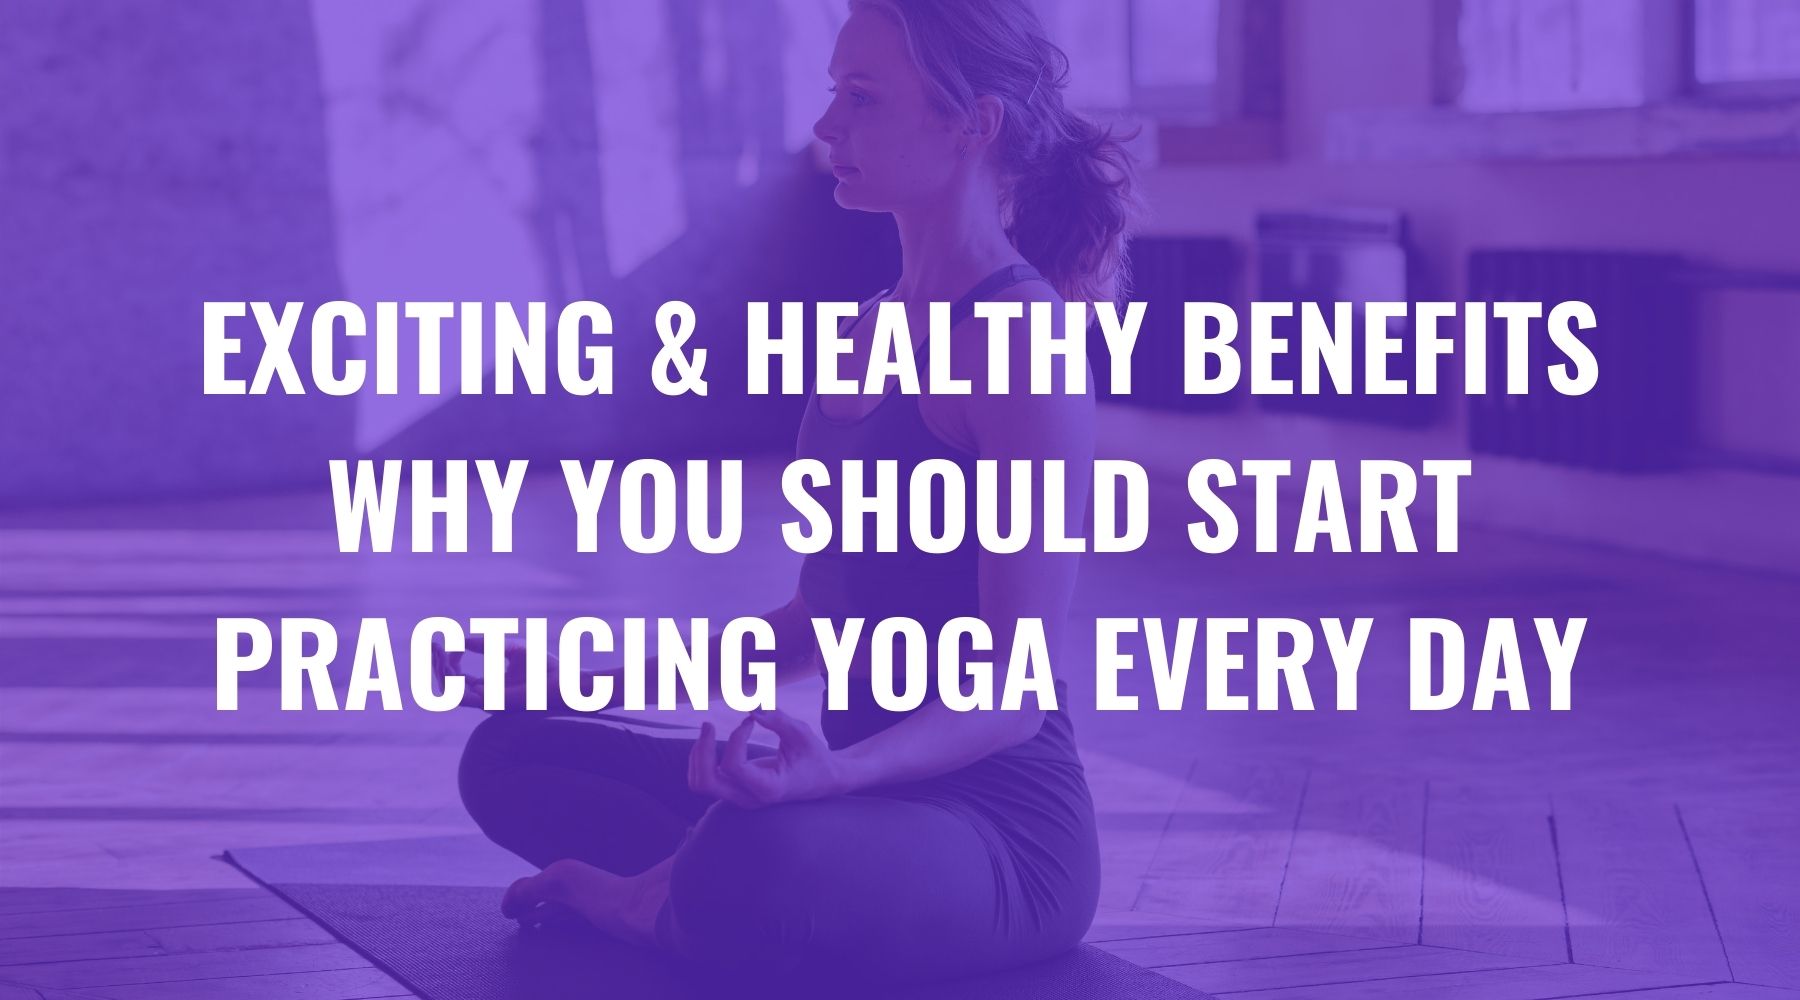 Exciting & Healthy Benefits Why You Should Start Practicing Yoga Every Day